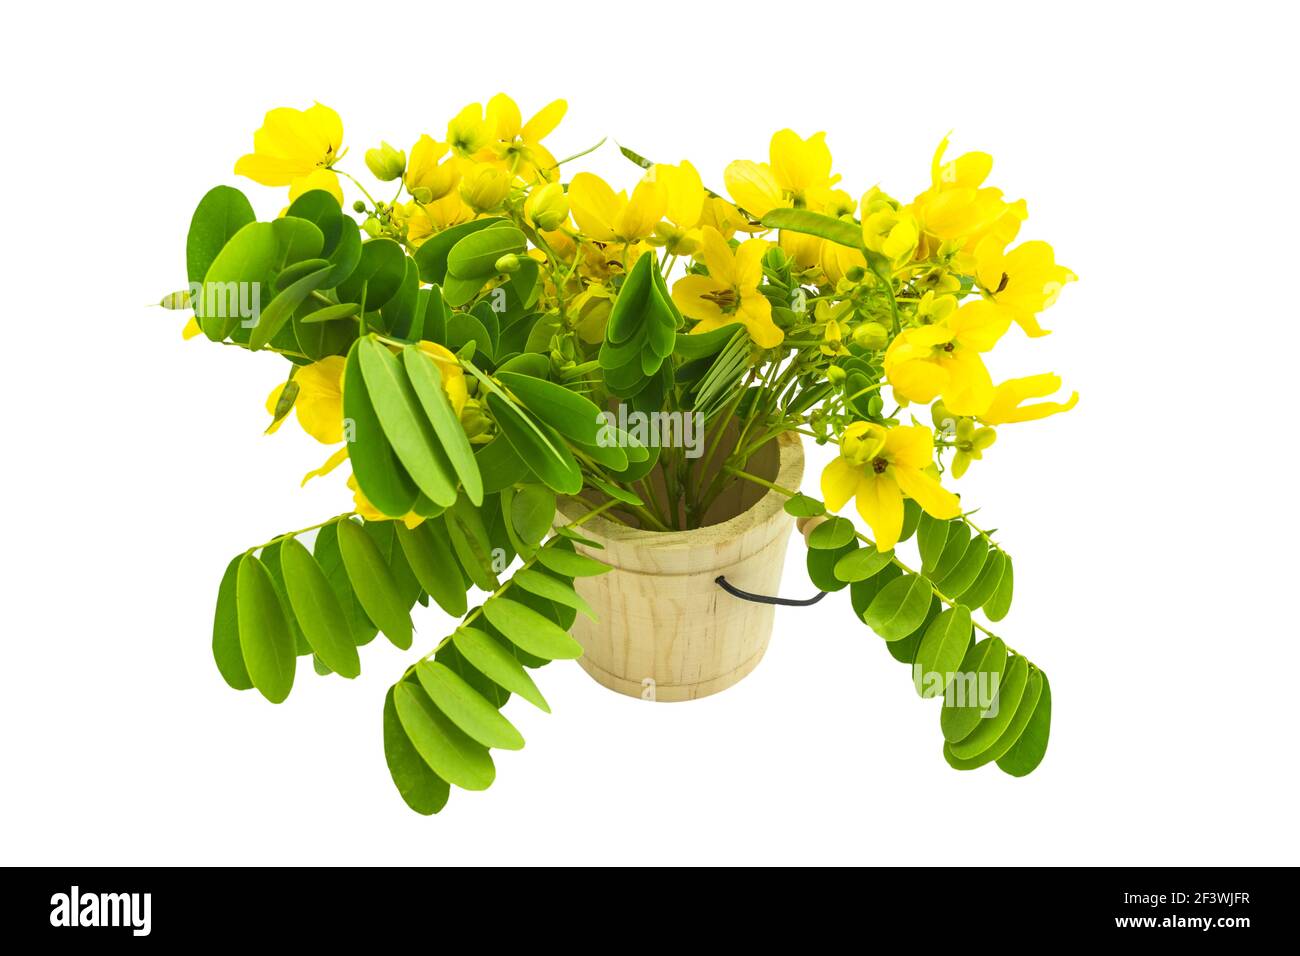 Closed up yellow flower American Cassia or Golden Wonder isolated in wooden csaks on white background.Saved with clipping path. Stock Photo